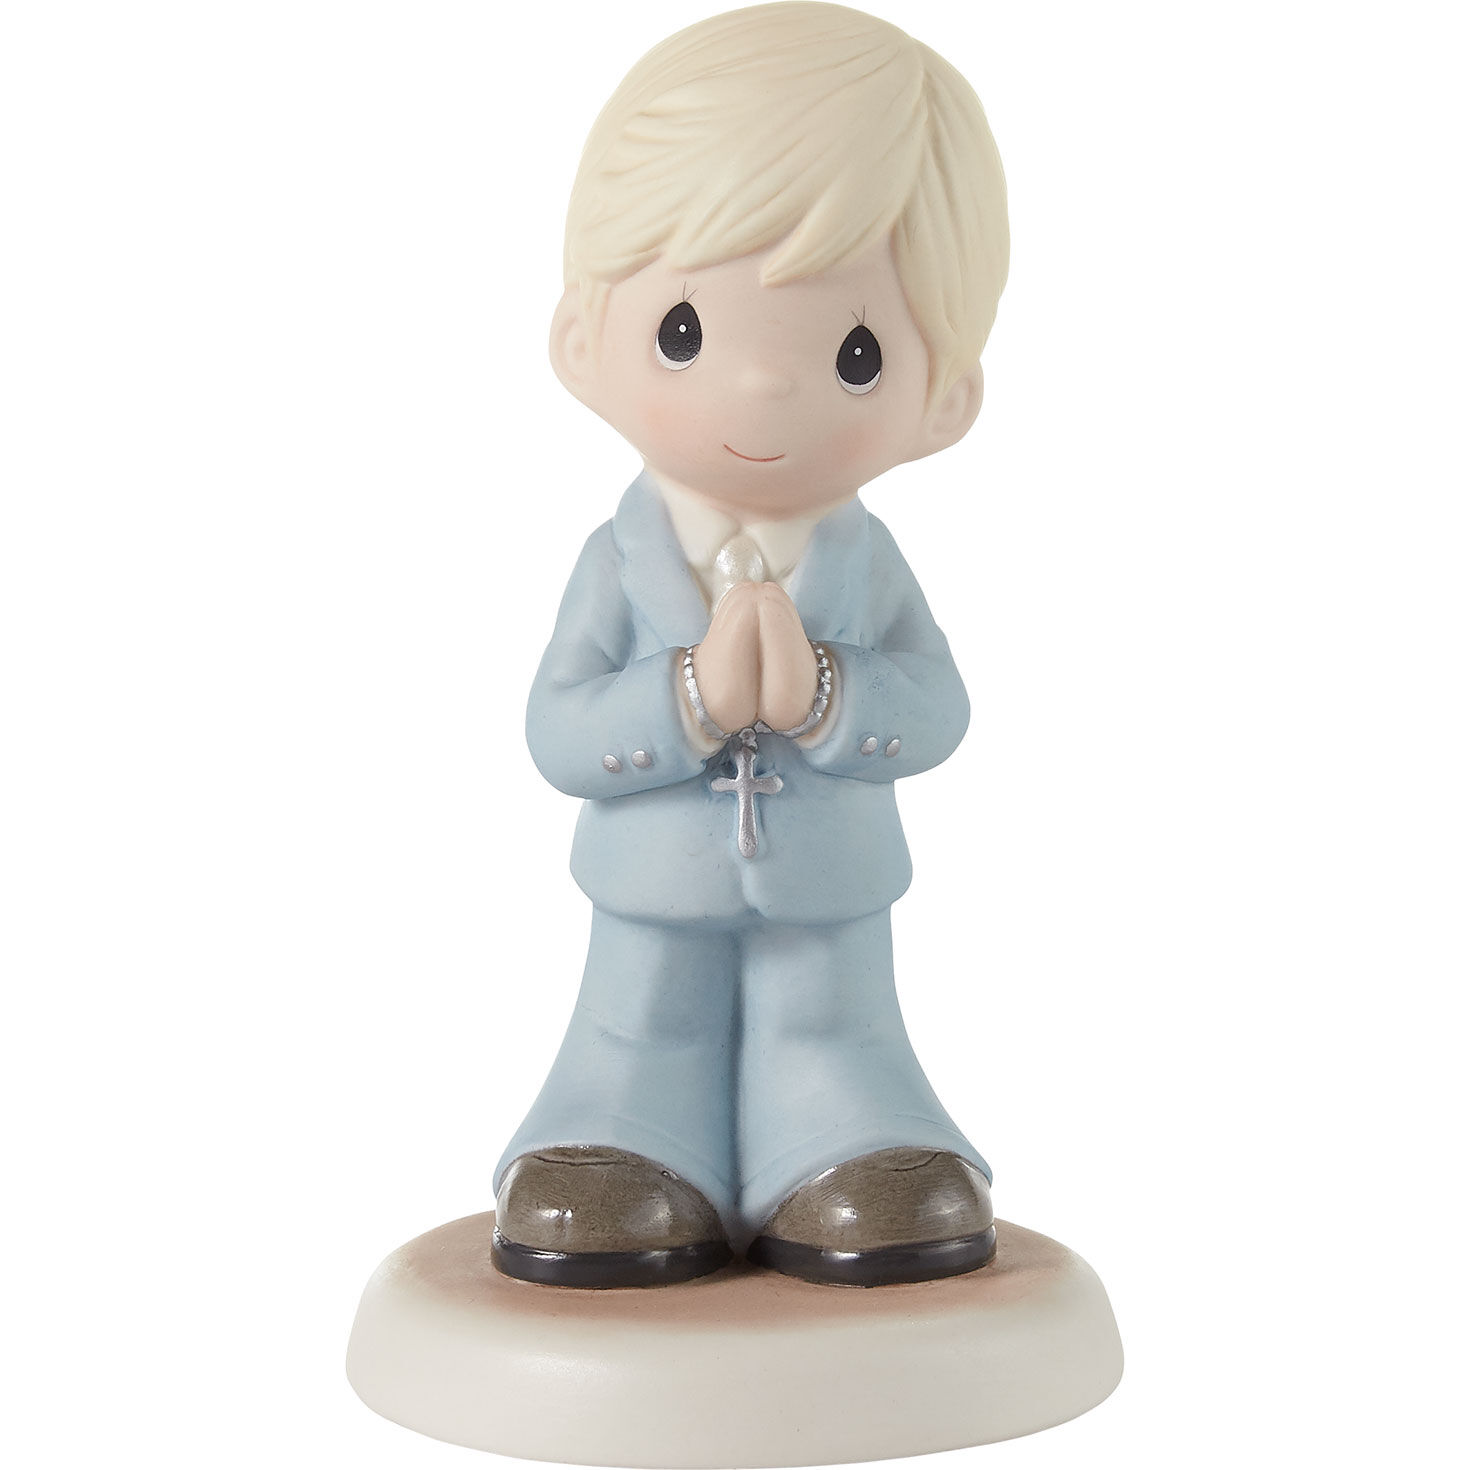 Precious Moments Blessings On Your First Communion Blonde Boy Figurine, 5.3" for only USD 49.99 | Hallmark